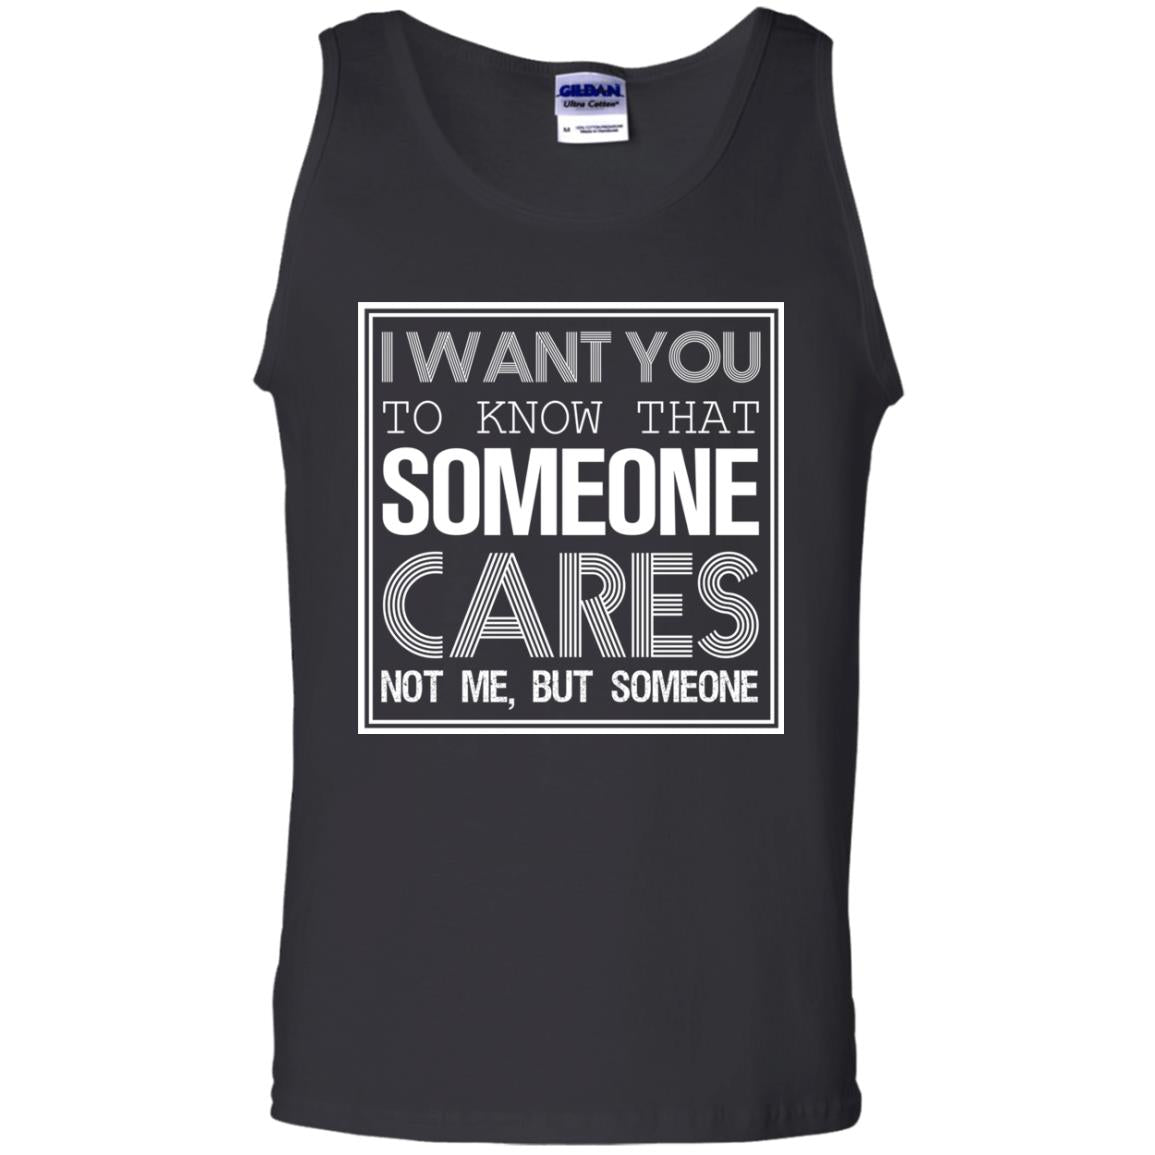 I Want You To Know That Someone Cares Not Me But SomeoneG220 Gildan 100% Cotton Tank Top